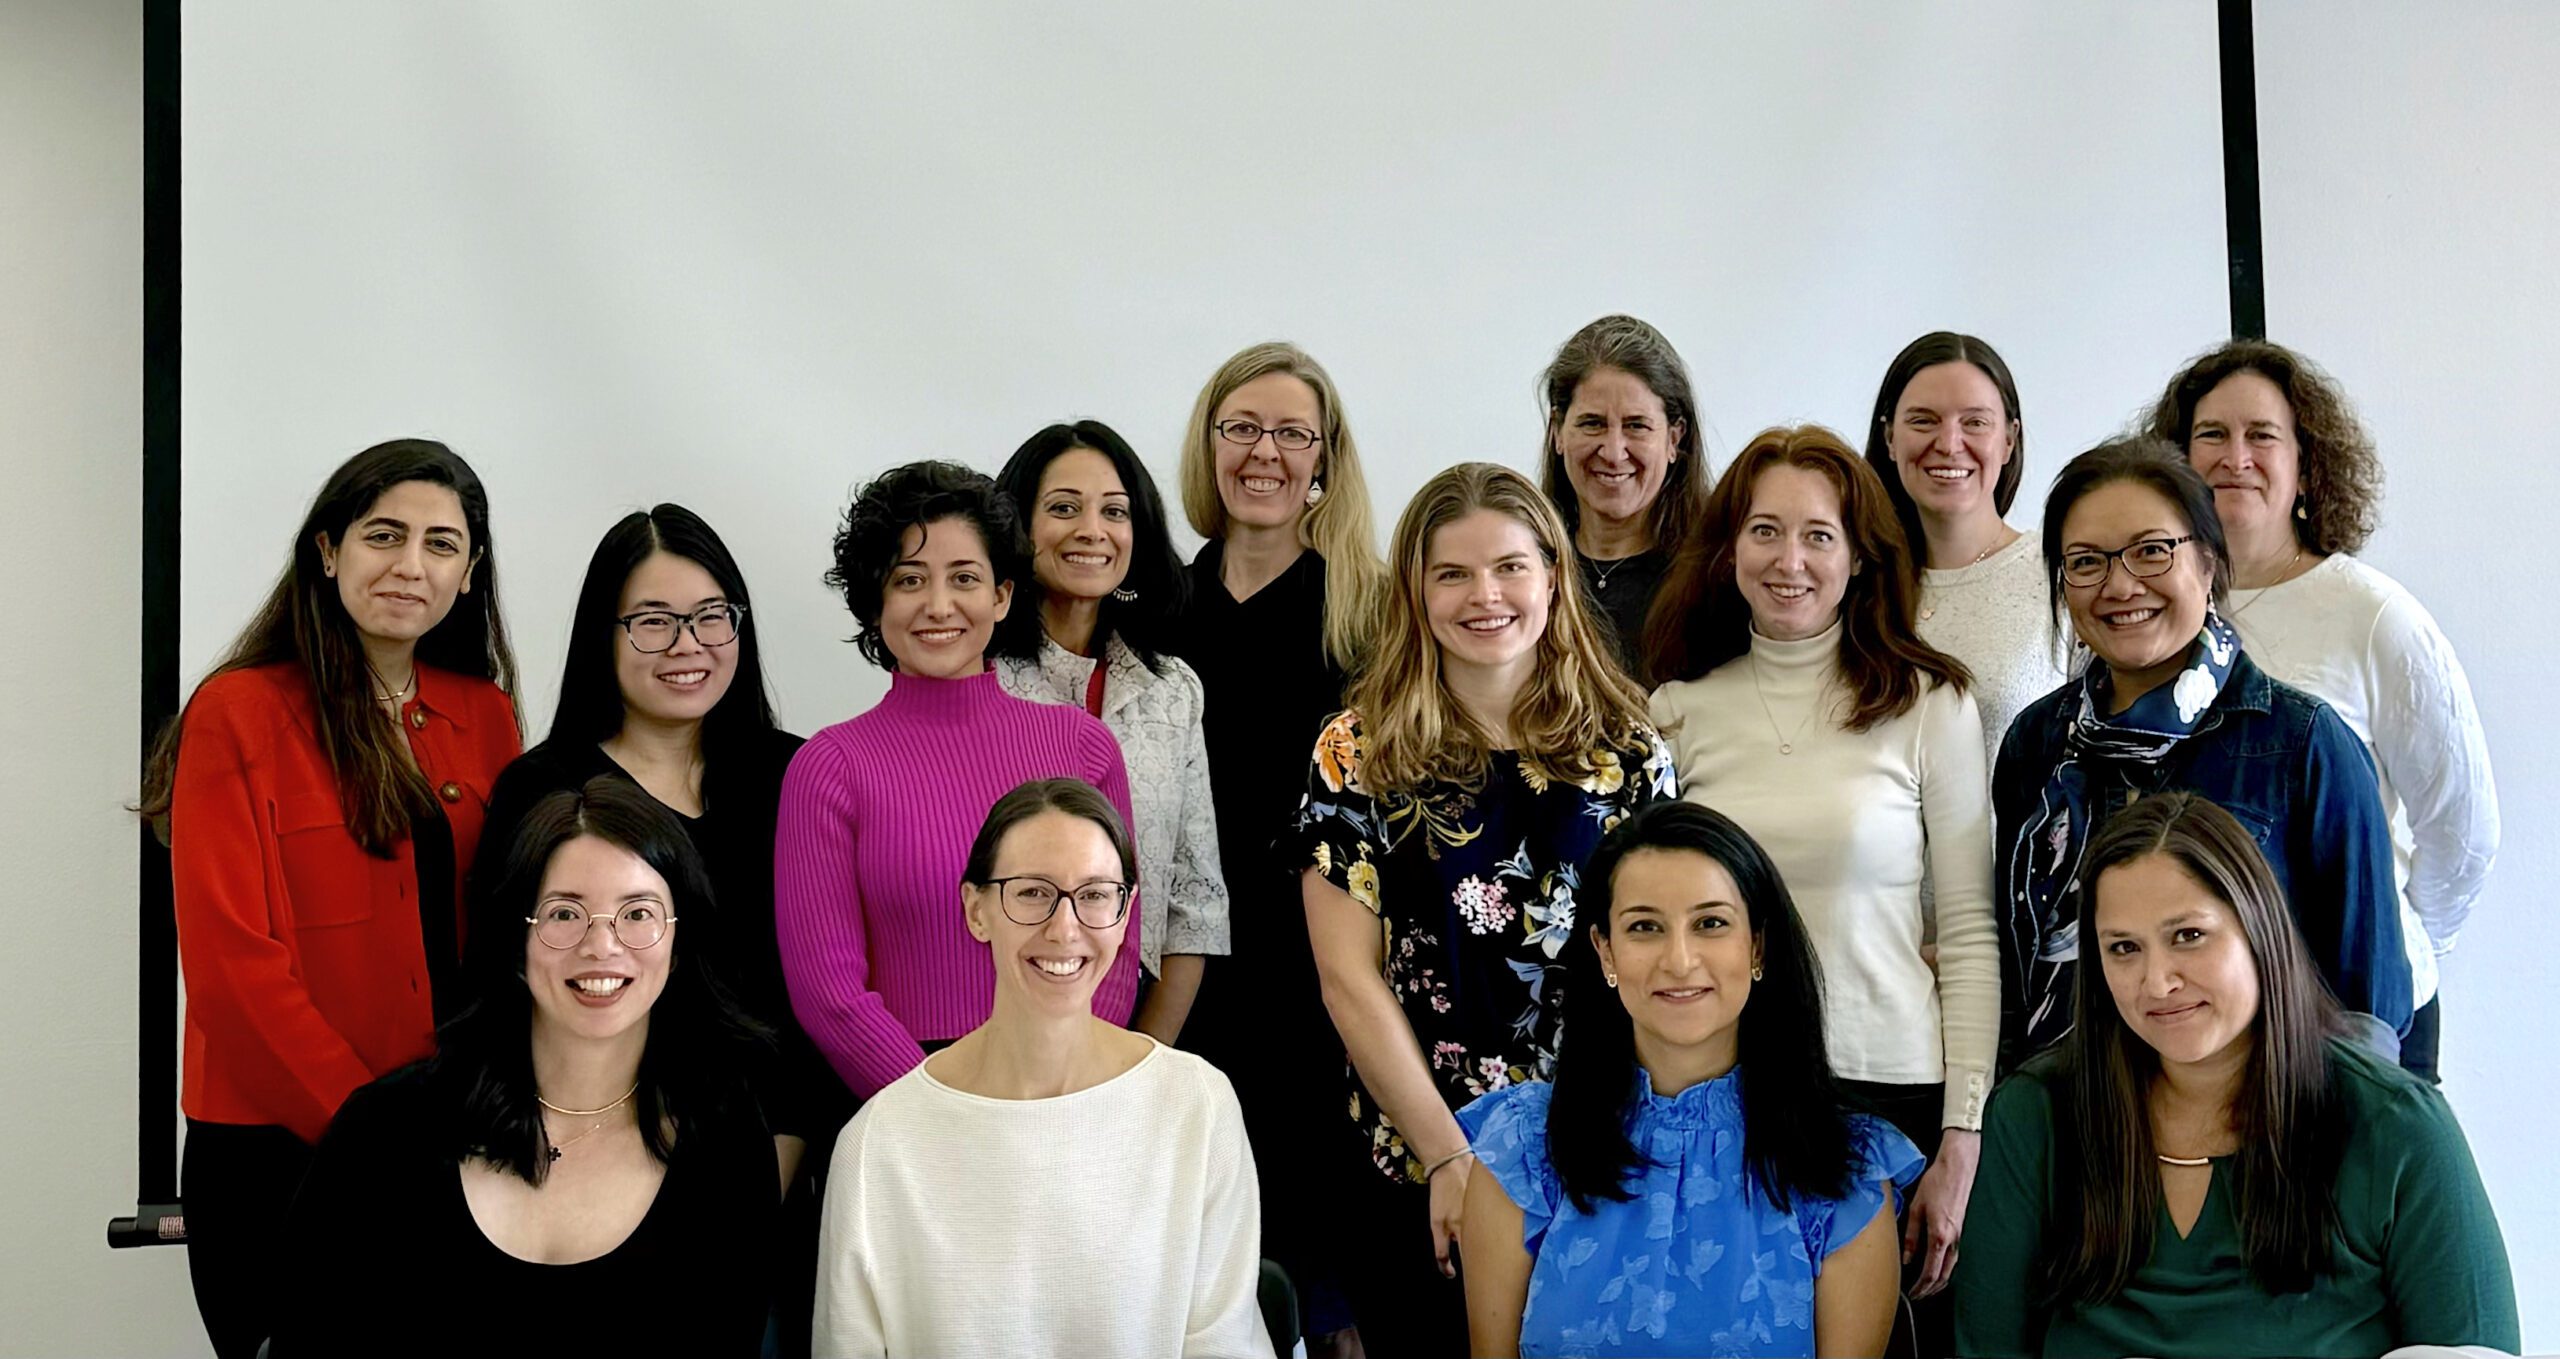 Fifteen members of the Women in Radiology club poses for a group photo. They wear business casual attire and are smiling.